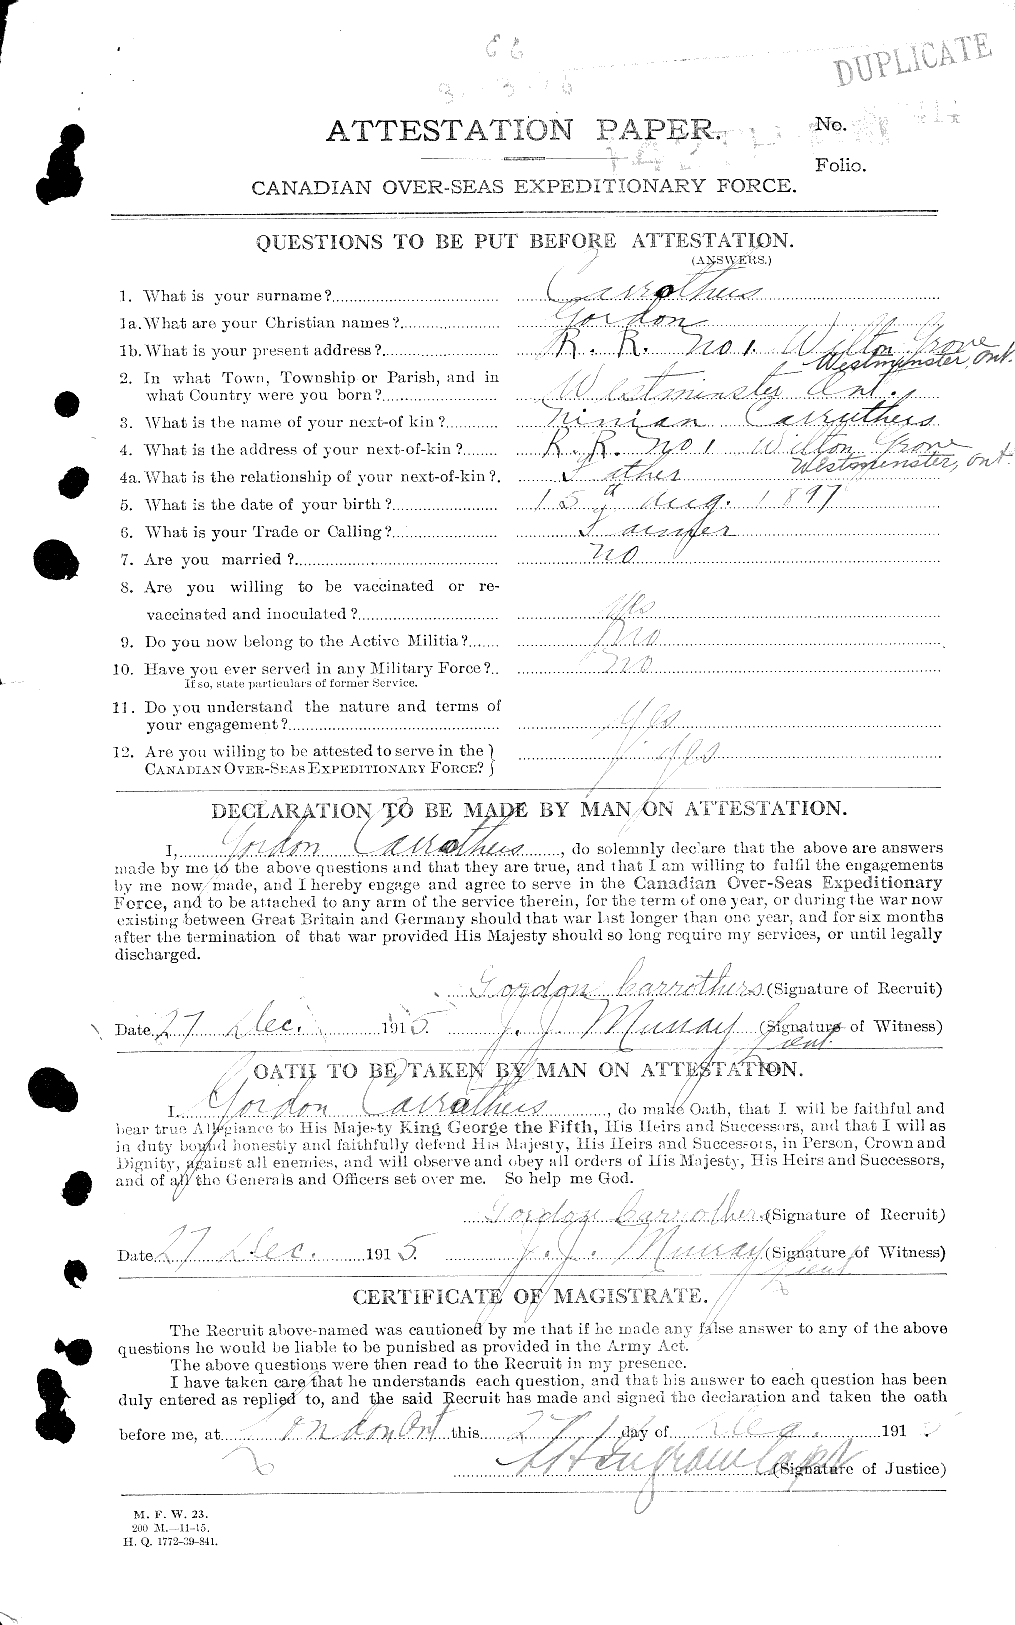 Personnel Records of the First World War - CEF 010681a